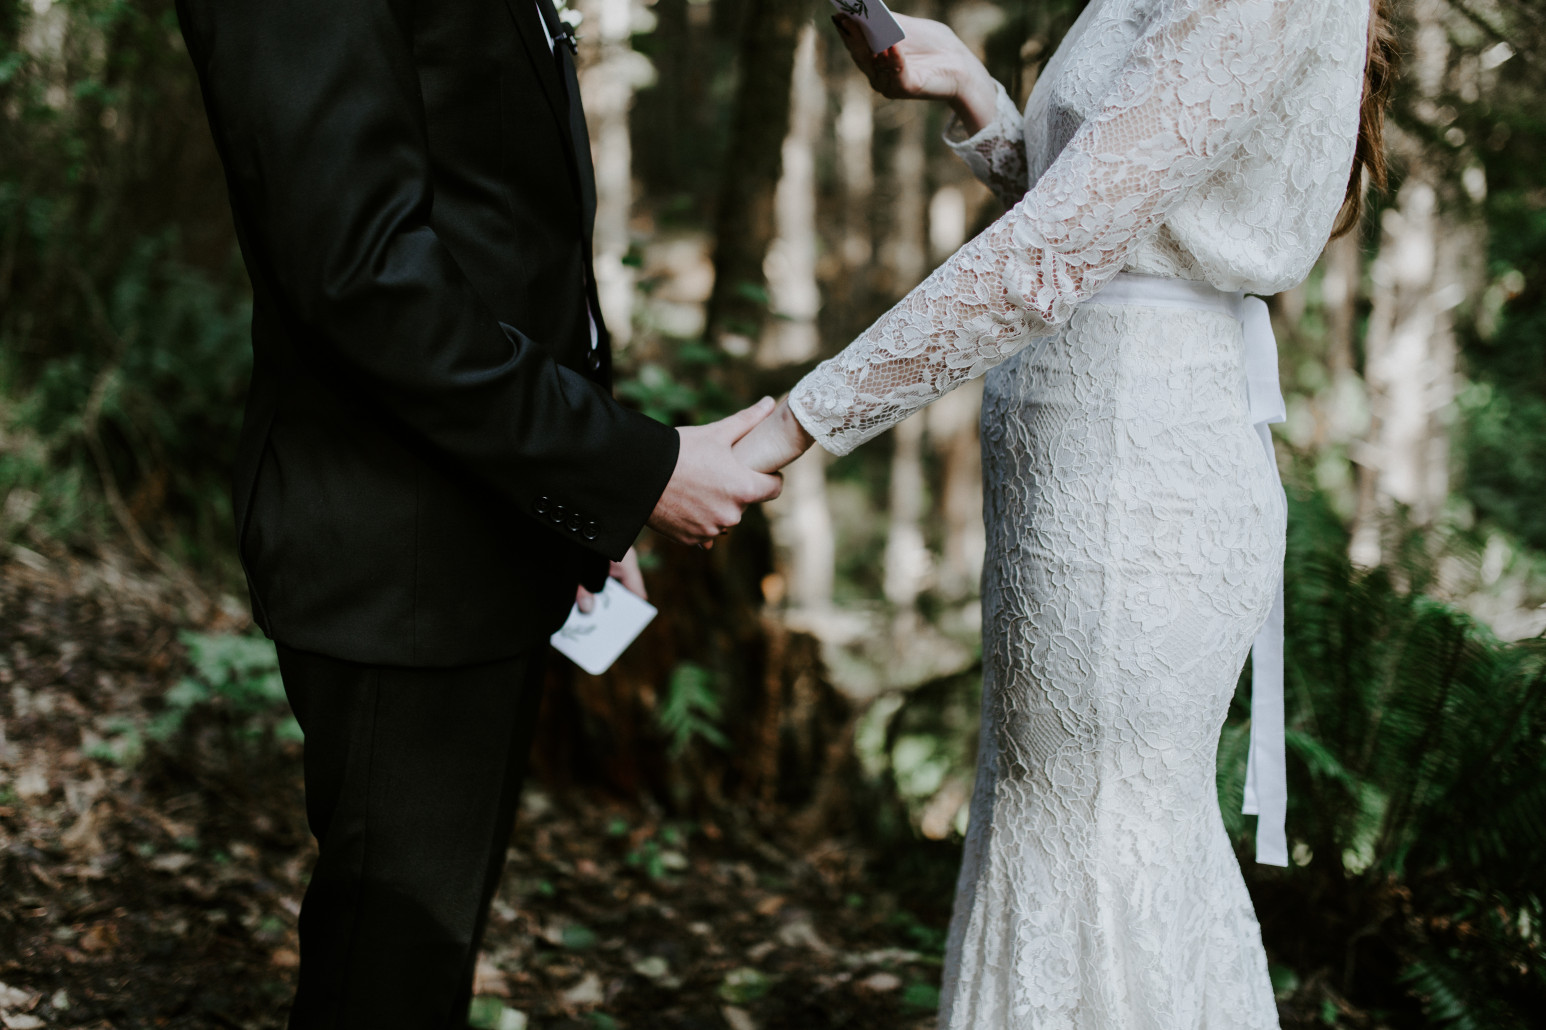 Nicole and Vlad hold hands during their elopement. Elopement wedding photography at Cannon Beach by Sienna Plus Josh.